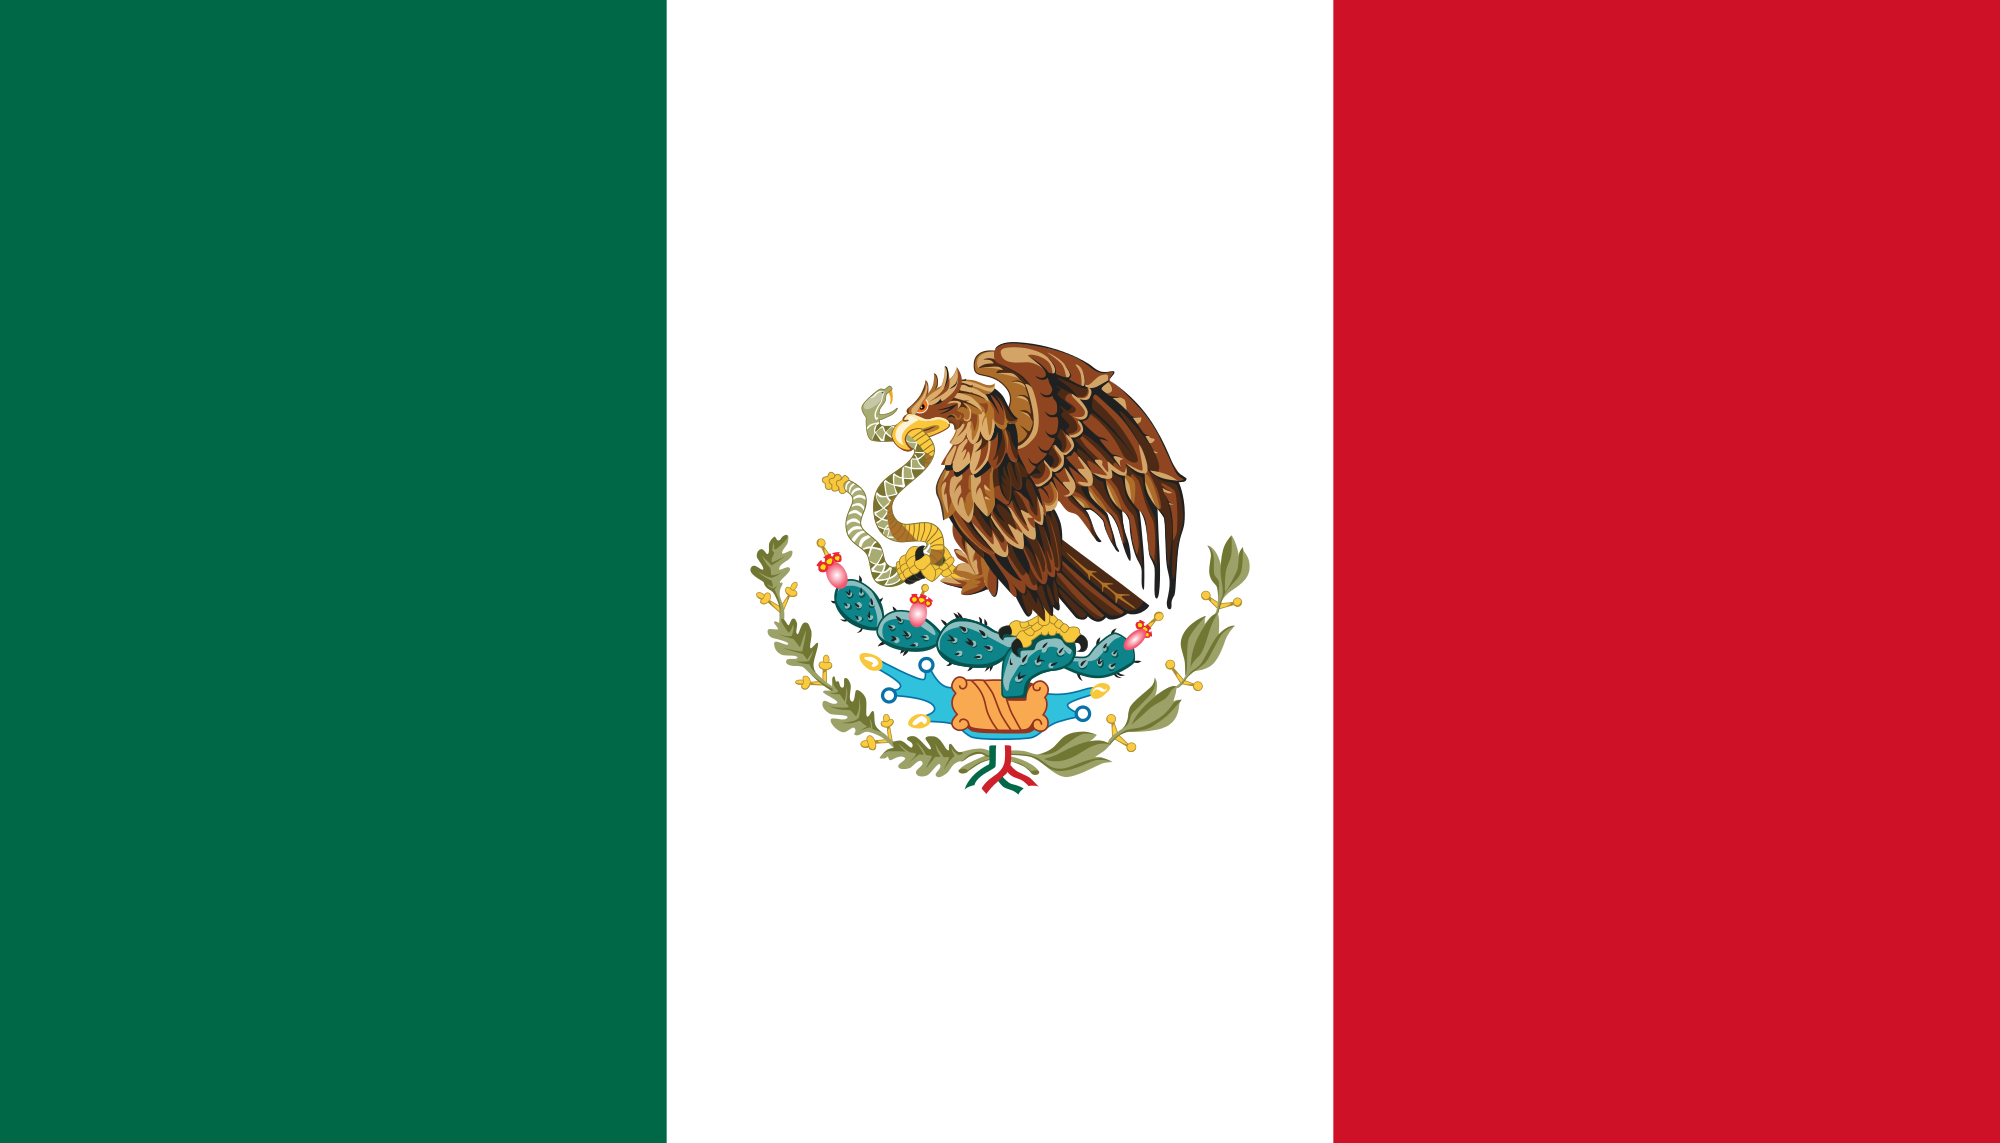 MEXICO IS EXPECTED TO CONTINUE TO GROW AT A MODERATE PACE (2.4 PERCENT IN 2016 AND 2.6 PERCENT IN 2017).